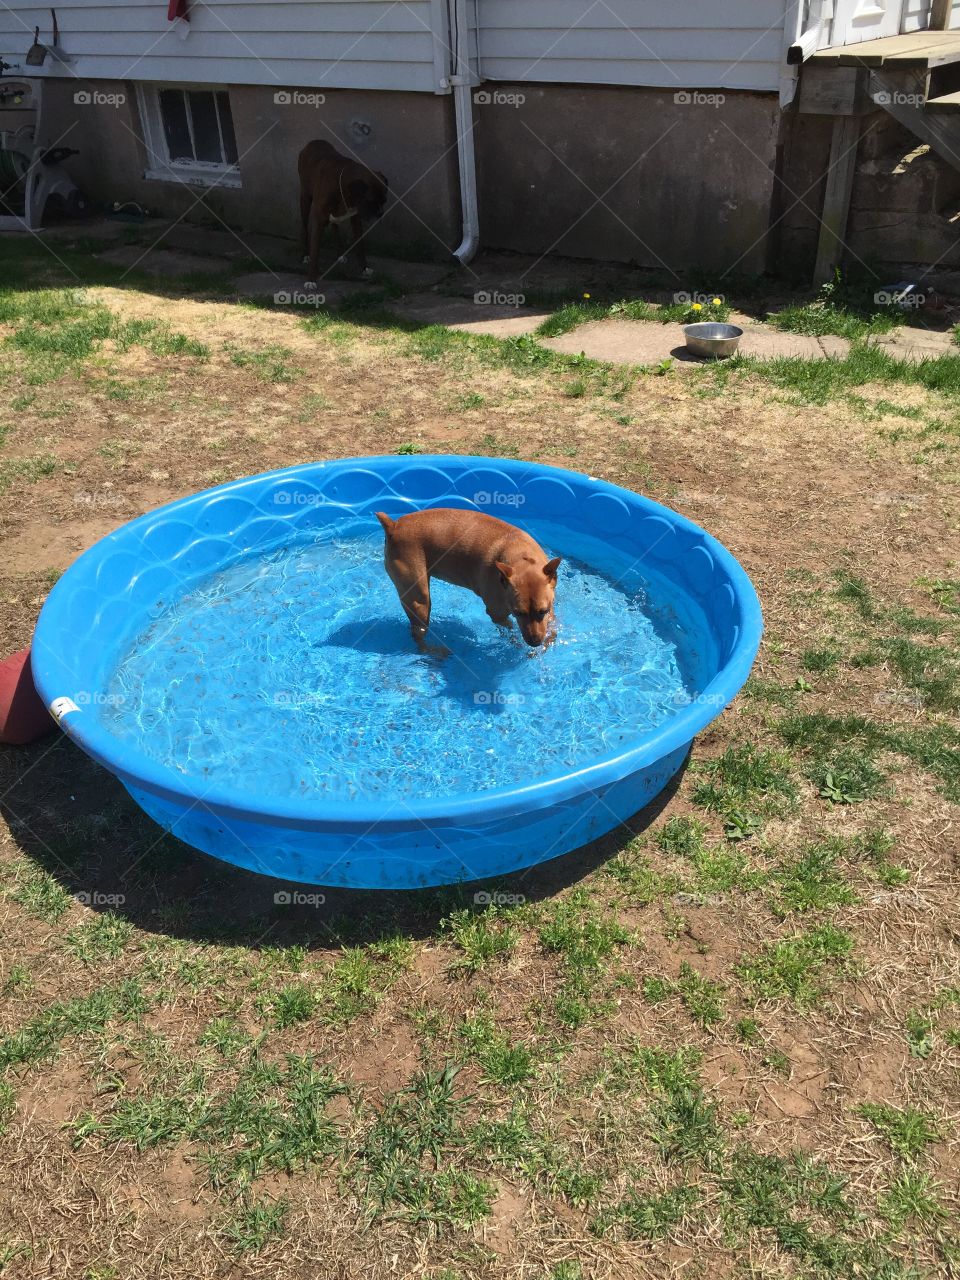 Precious in her pool